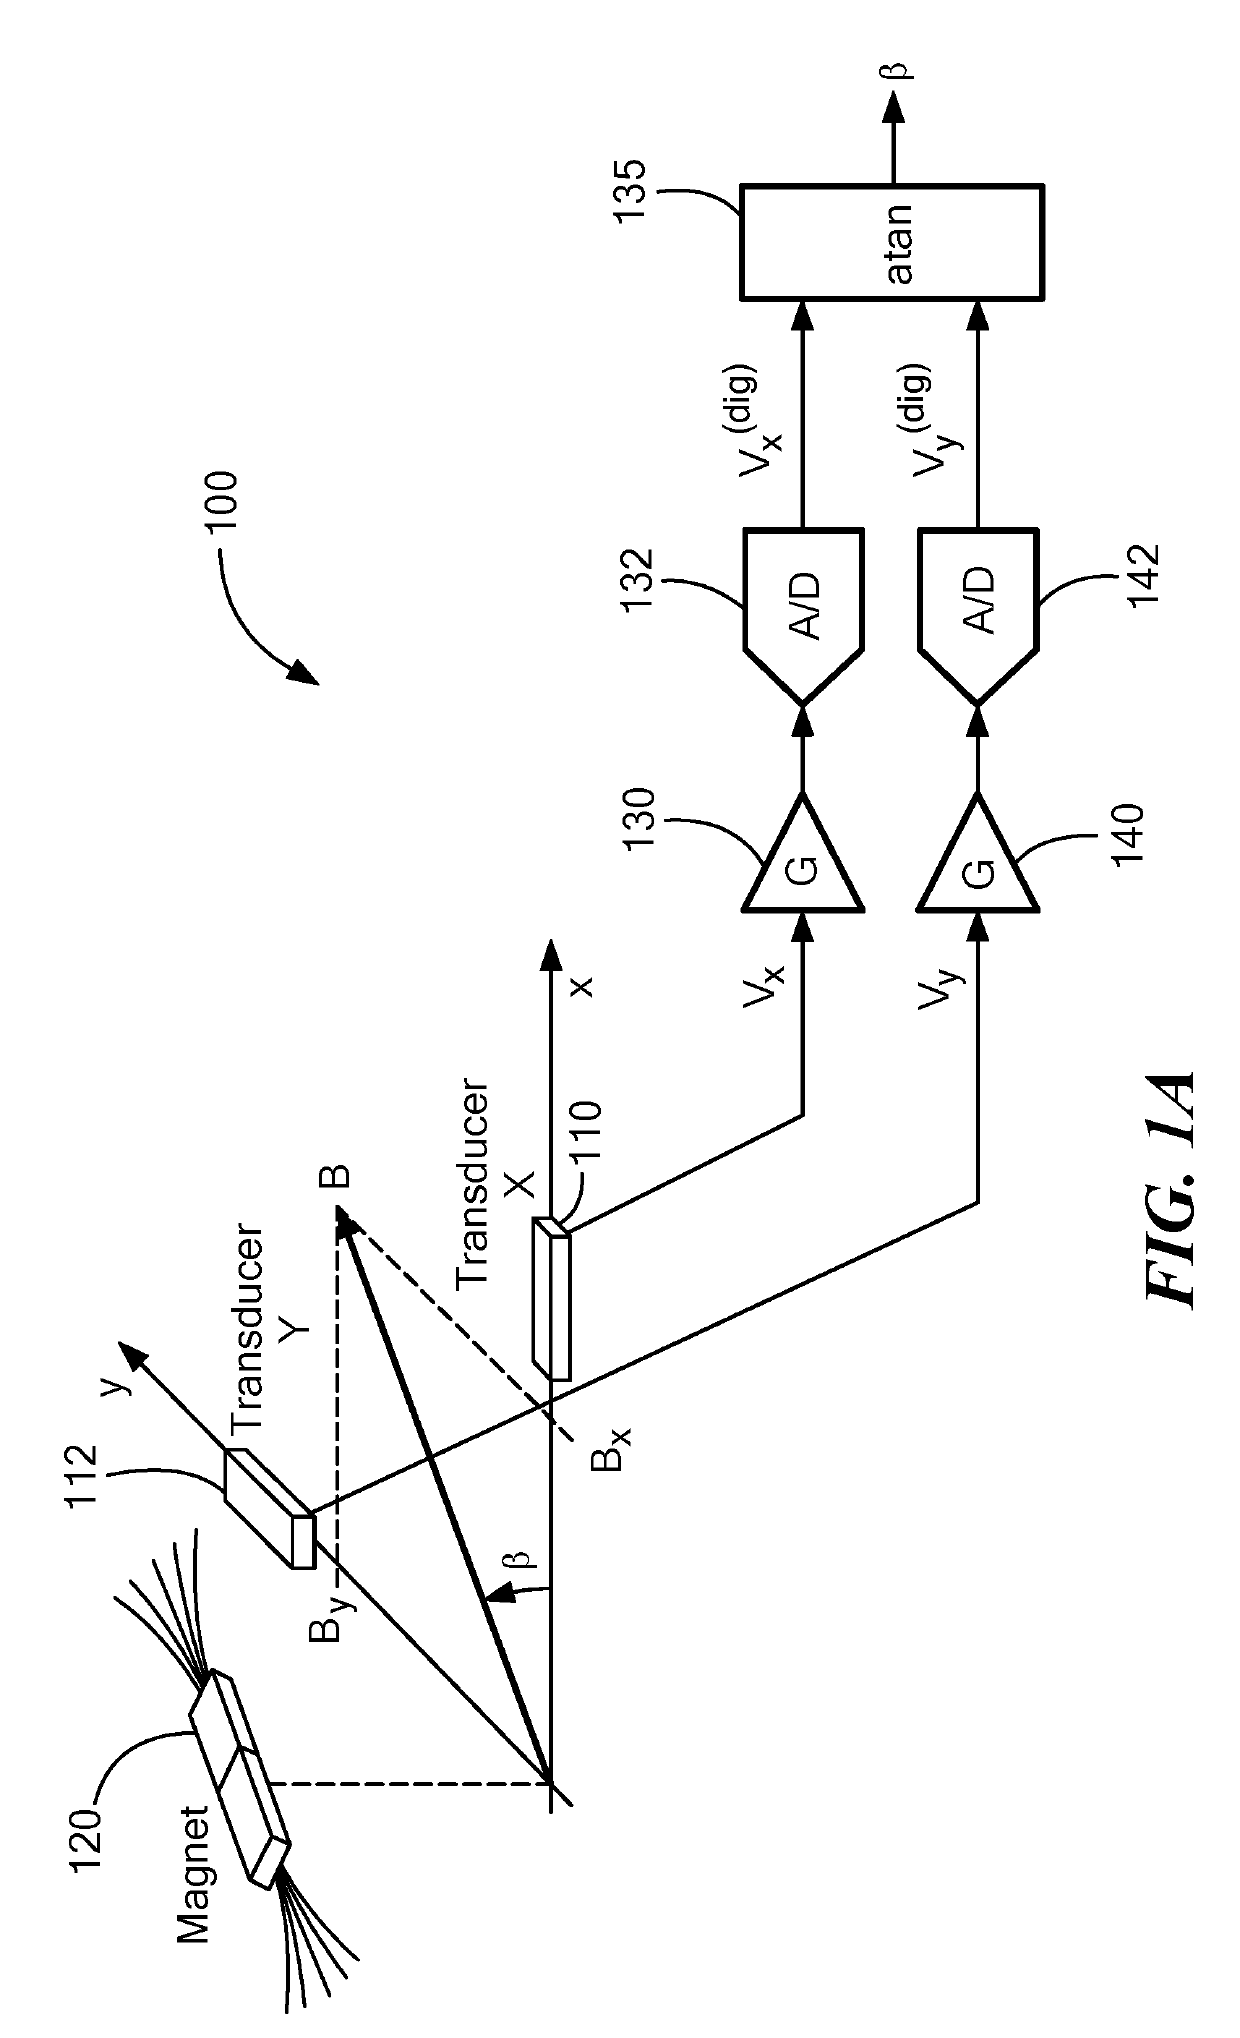 Non-orthogonality compensation of a magnetic field sensor